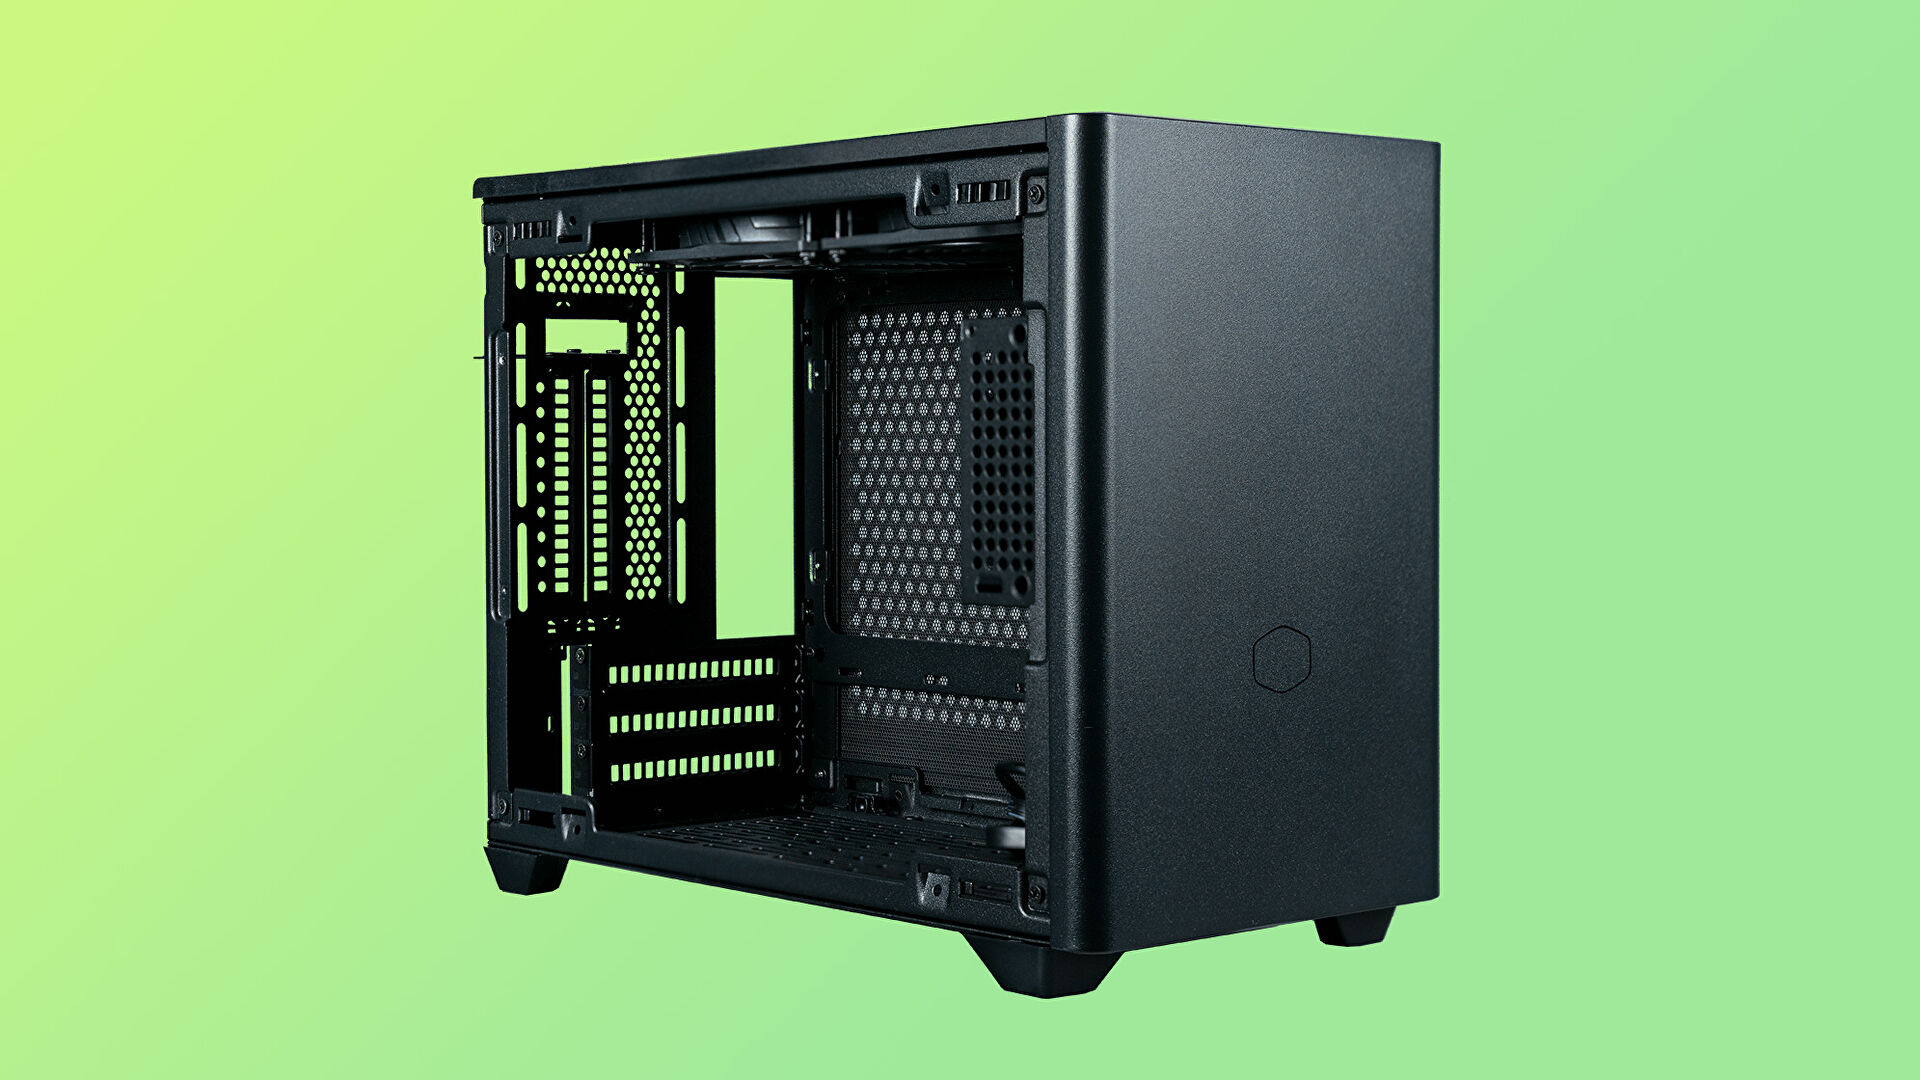 The clever and beautiful Cooler Master NR200P ITX case is down to £54